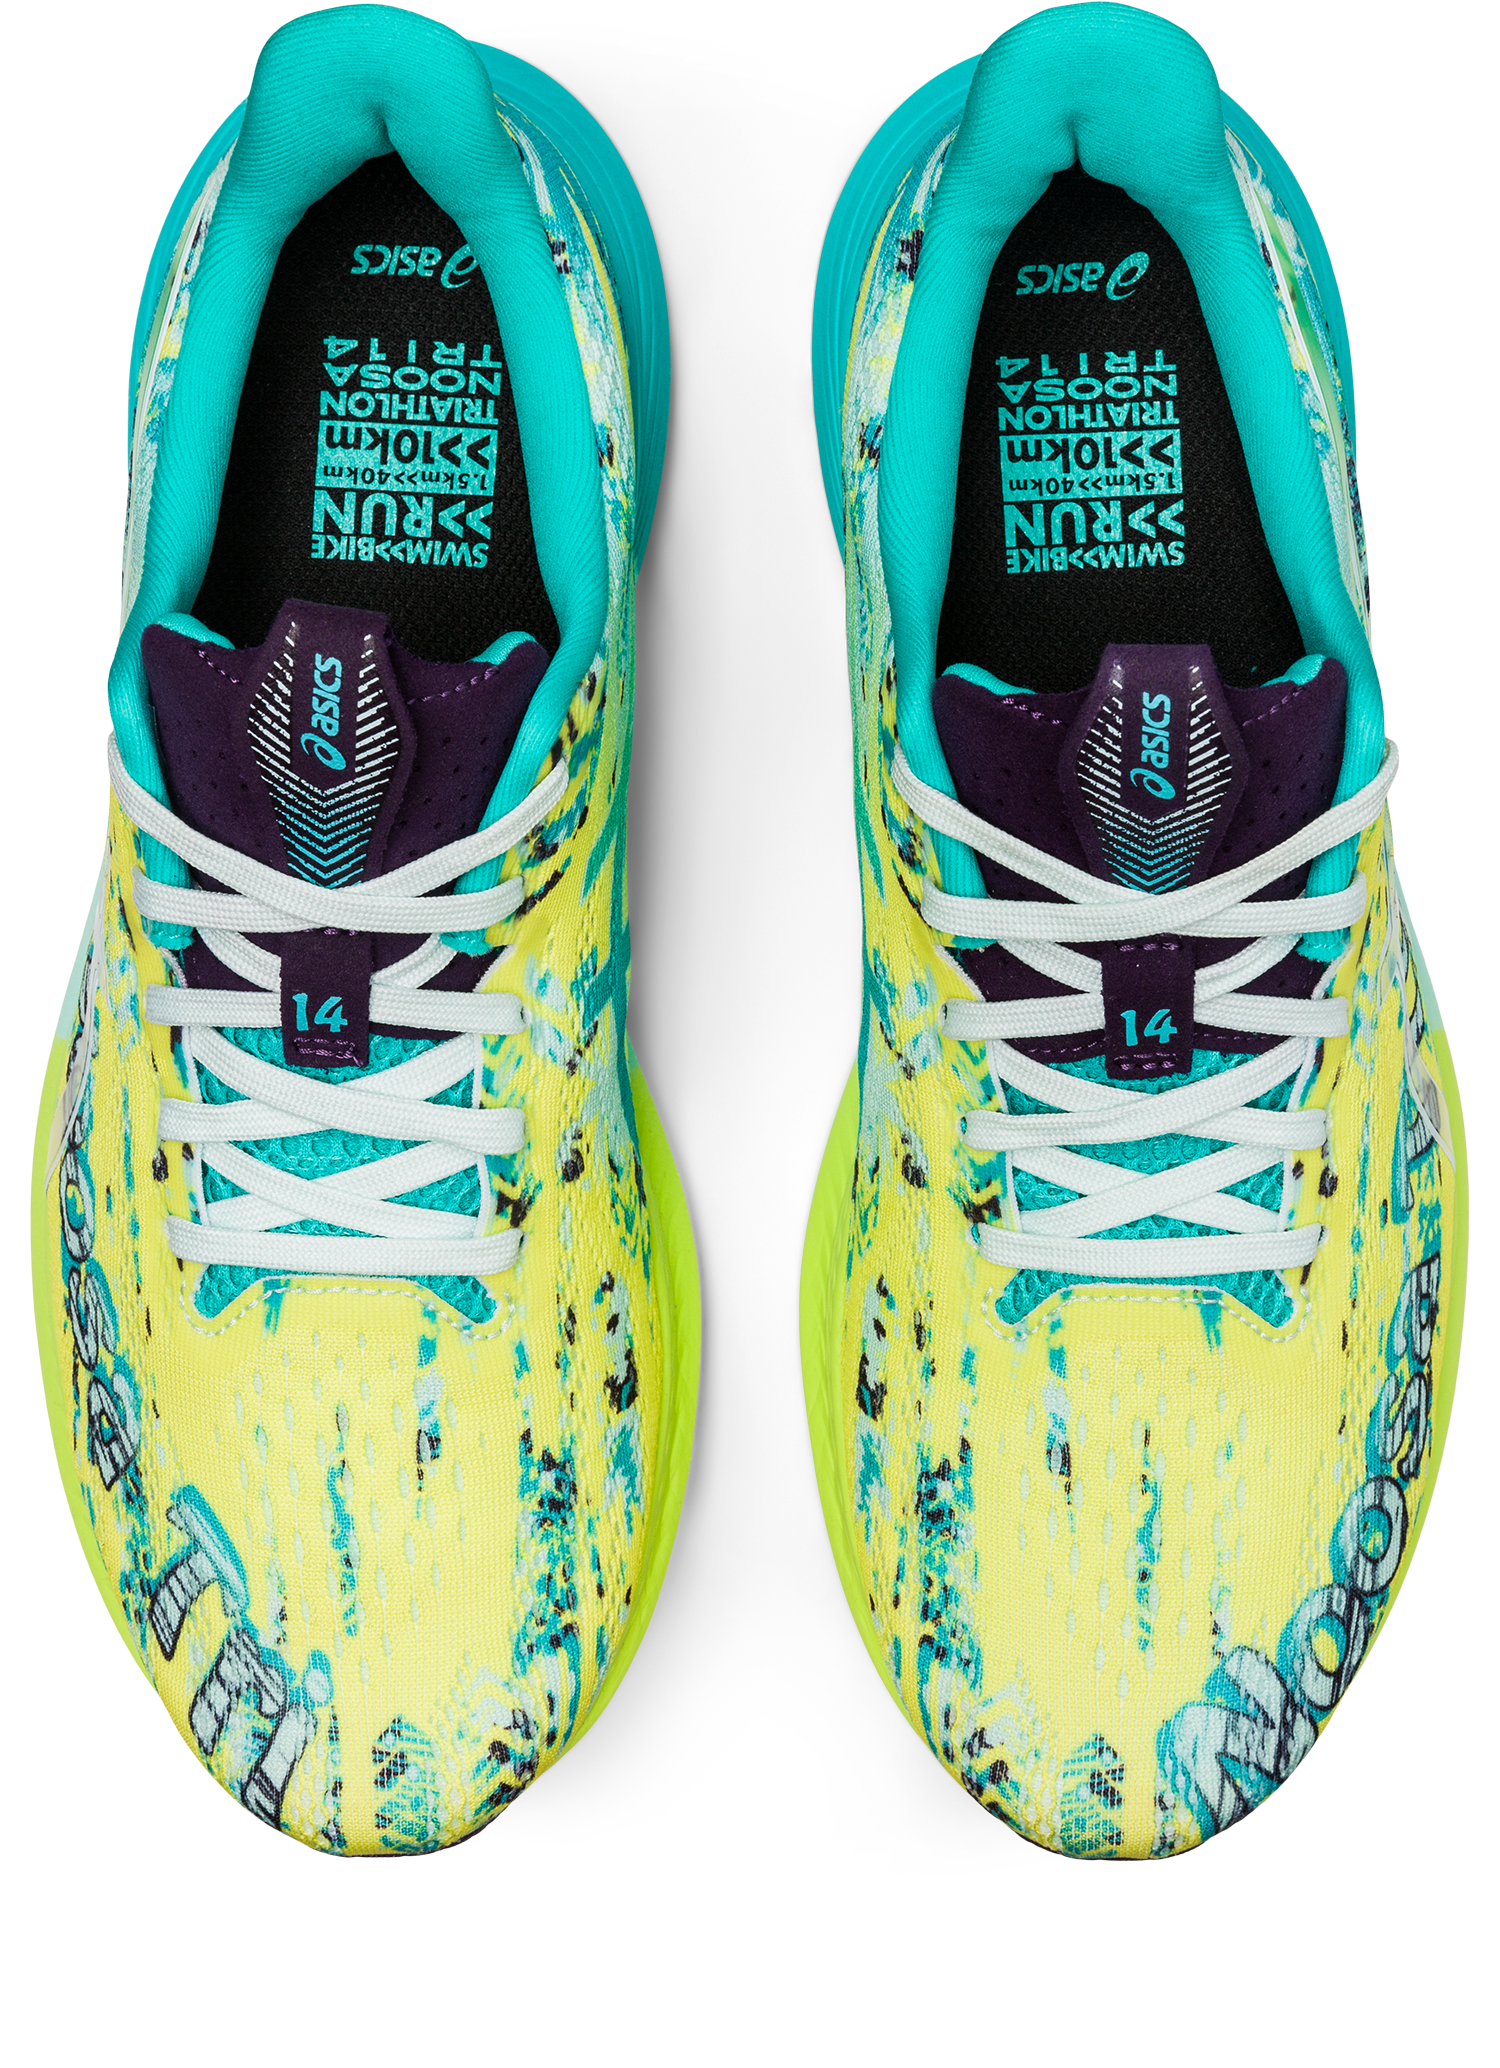 Asics Women's Gel-Noosa Tri 14 Running Shoes in Safety Yellow/Soothing Sea